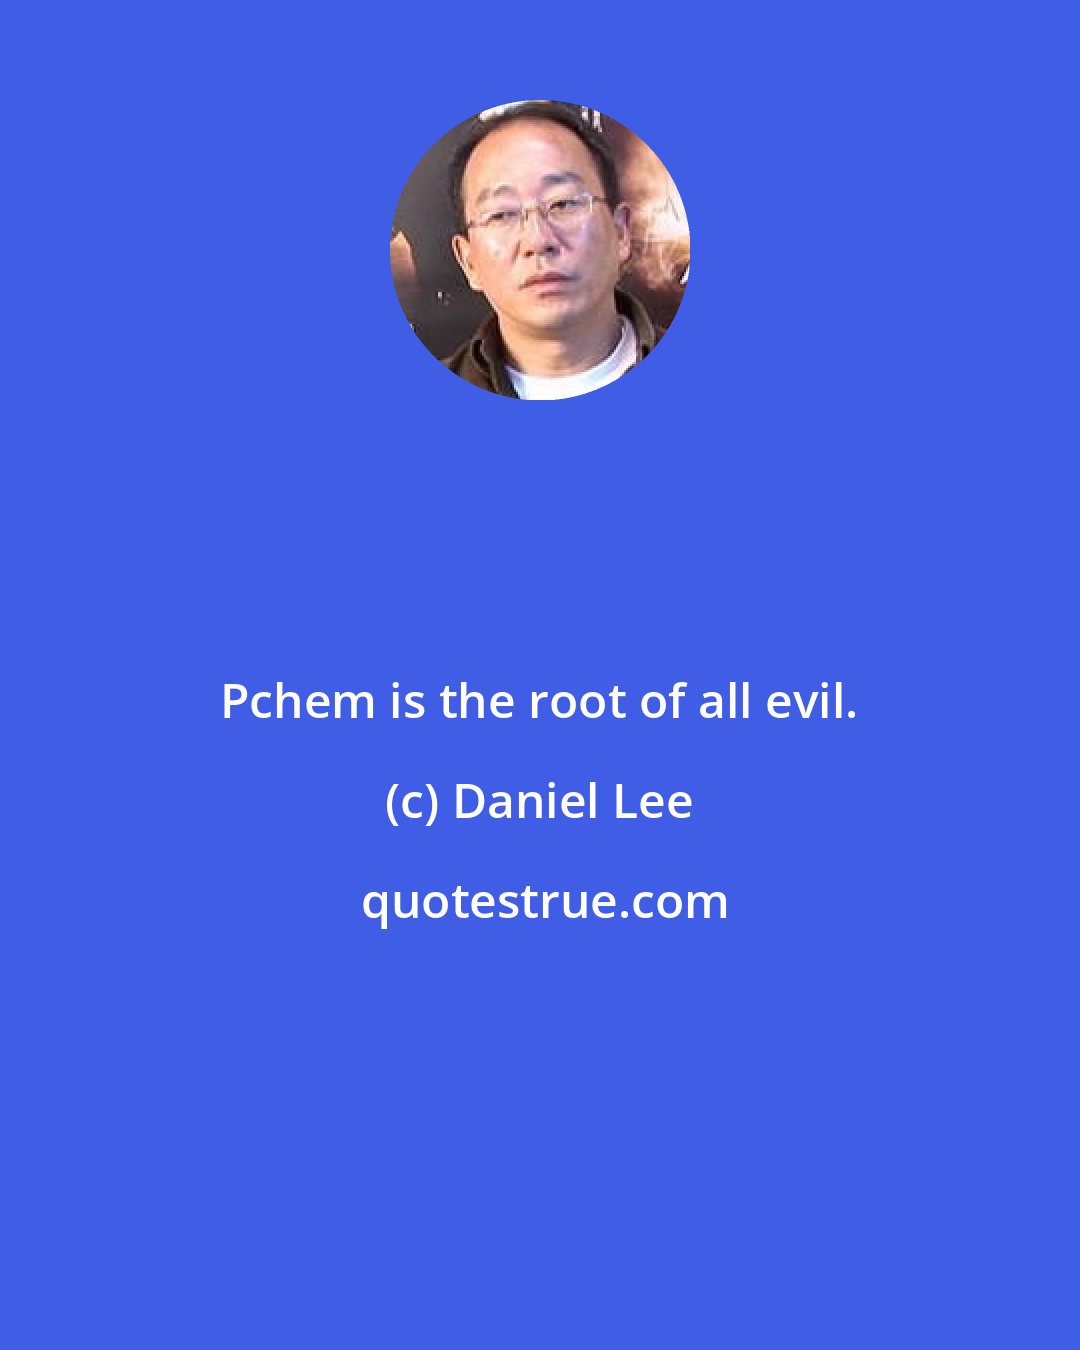 Daniel Lee: Pchem is the root of all evil.